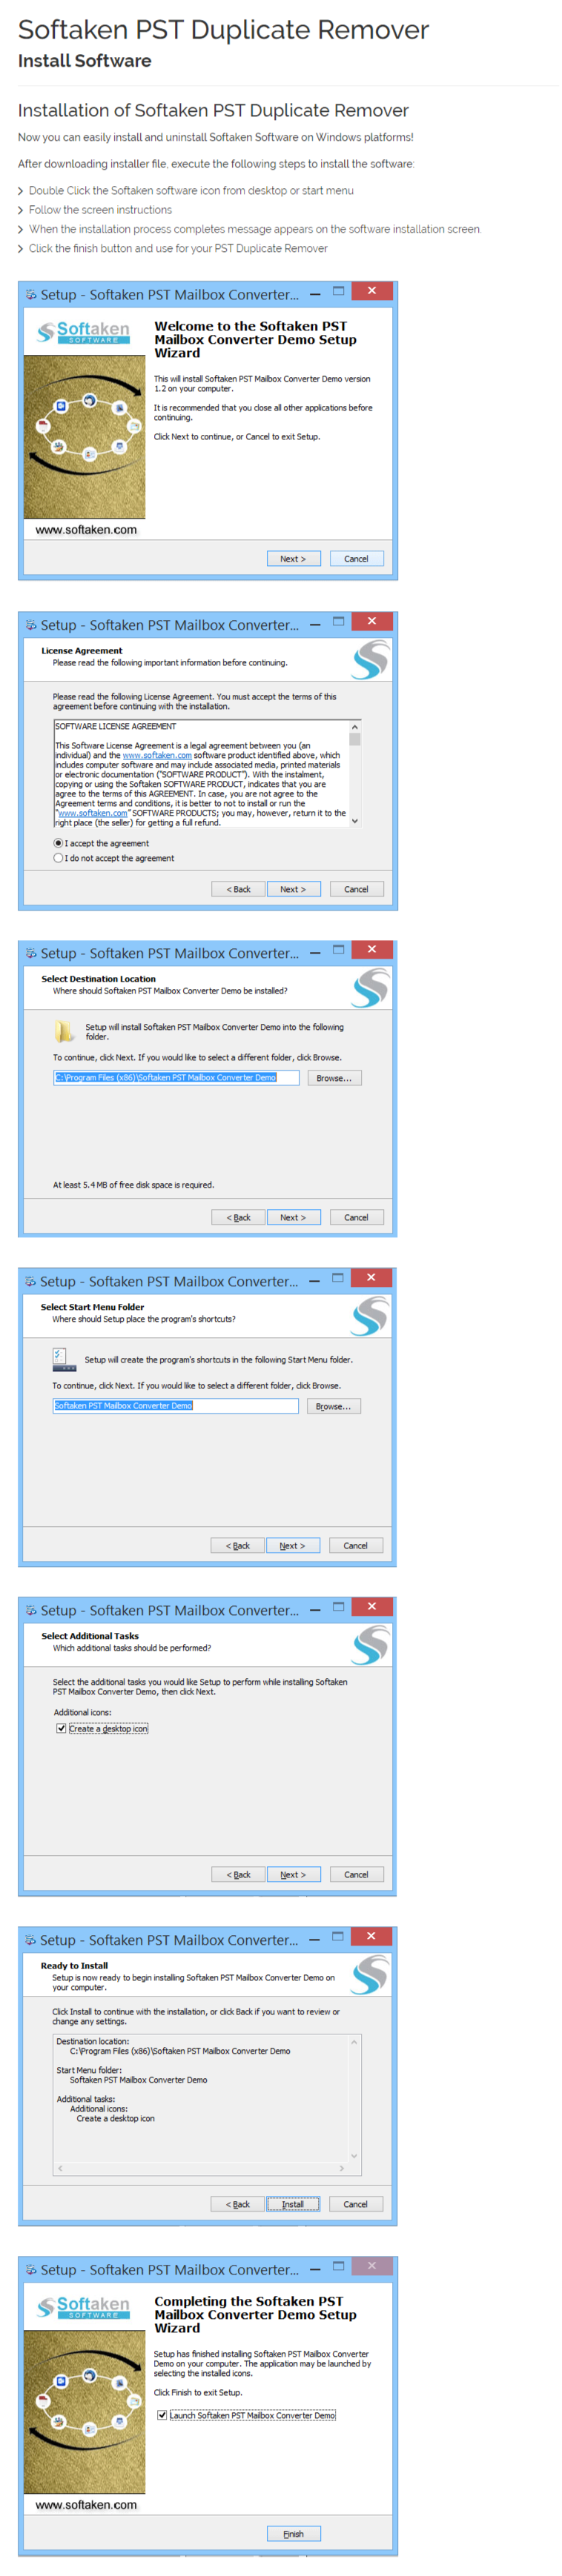 PST Duplicate Remover Installation